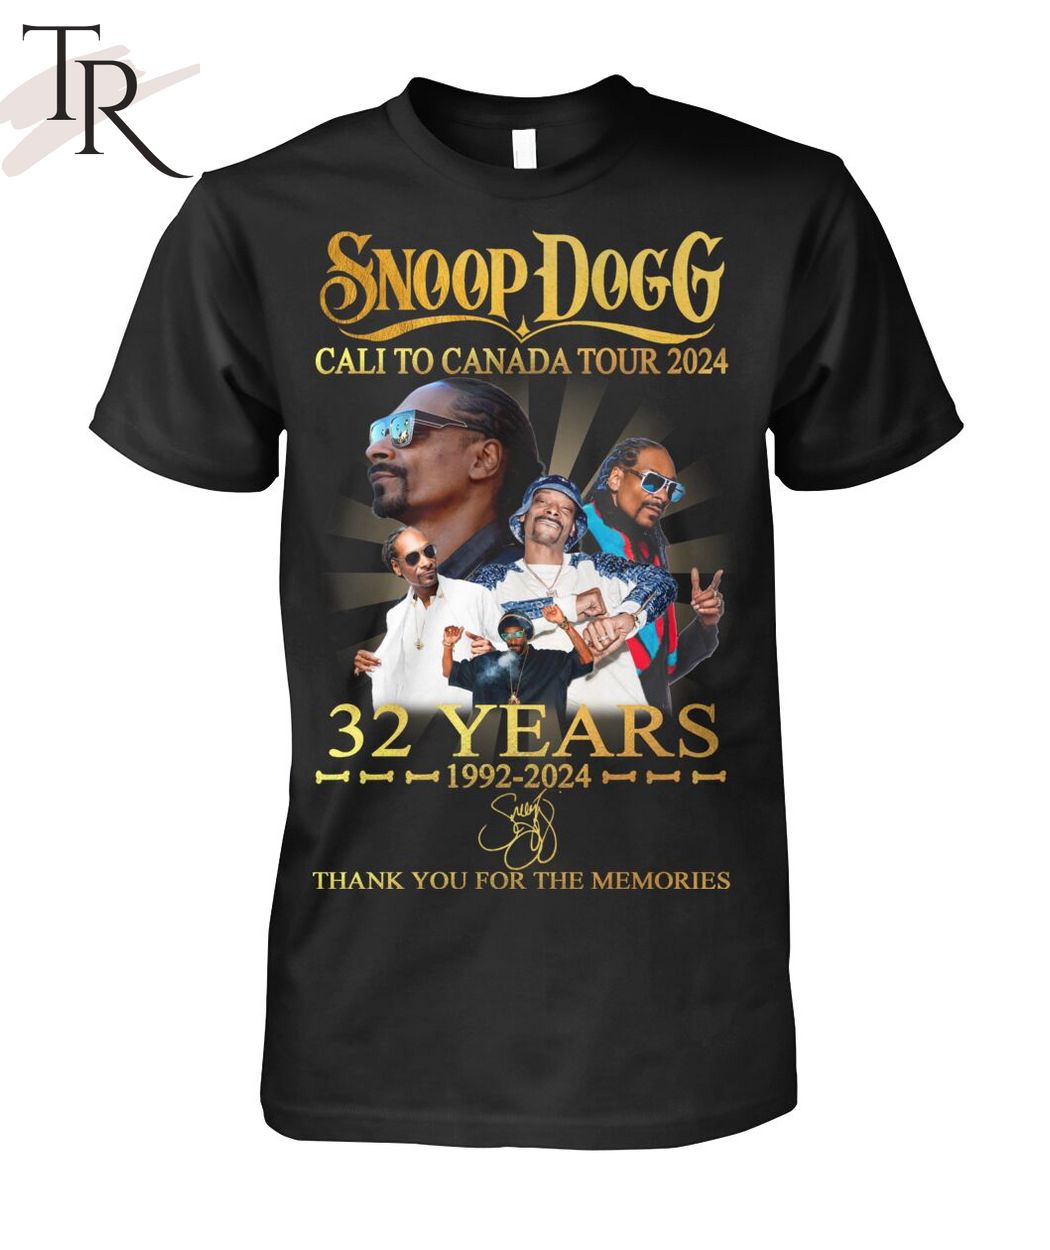 Snoop Dogg Cali To Canada Tour 2024 32 Years 1992-2024 Thank You For The Memories T-Shirt